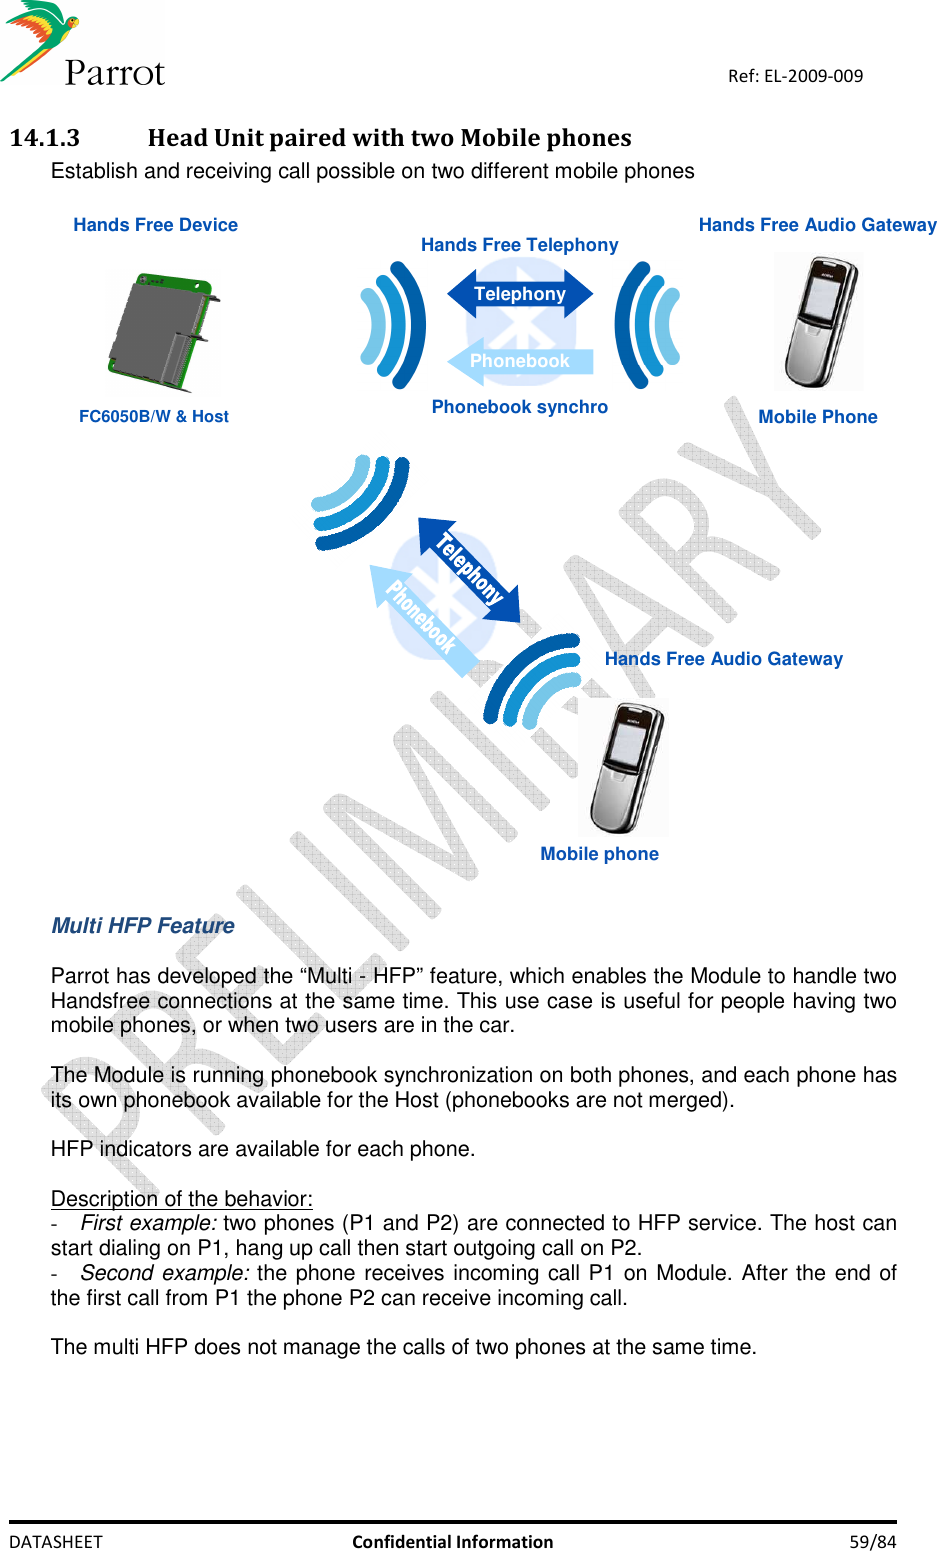    DATASHEET  Confidential Information  59/84 Ref: EL-2009-009 14.1.3 Head Unit paired with two Mobile phones  Establish and receiving call possible on two different mobile phones   Hands Free Audio Gateway Hands Free DeviceMobile PhoneHands Free TelephonyTelephonyPhonebookPhonebook synchroMobile phone Hands Free Audio Gateway FC6050B/W &amp; Host  Multi HFP Feature  Parrot has developed the “Multi - HFP” feature, which enables the Module to handle two Handsfree connections at the same time. This use case is useful for people having two mobile phones, or when two users are in the car.   The Module is running phonebook synchronization on both phones, and each phone has its own phonebook available for the Host (phonebooks are not merged).   HFP indicators are available for each phone.   Description of the behavior: - First example: two phones (P1 and P2) are connected to HFP service. The host can start dialing on P1, hang up call then start outgoing call on P2. - Second example: the phone receives incoming call P1 on Module. After the end of the first call from P1 the phone P2 can receive incoming call.   The multi HFP does not manage the calls of two phones at the same time.  